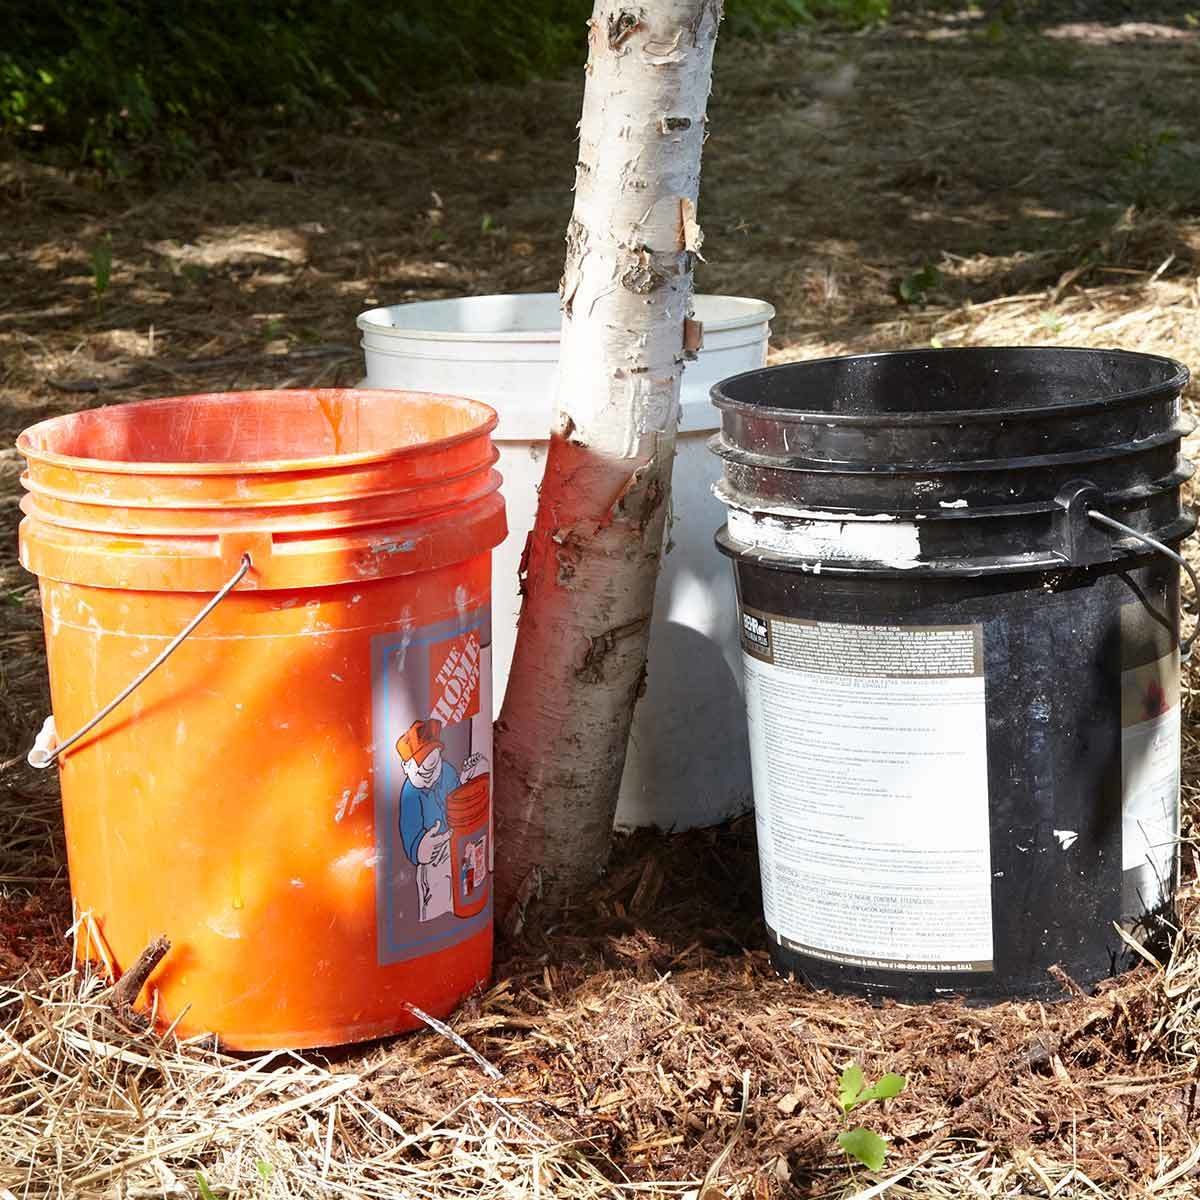 15 Brilliant 5 Gallon Bucket Hacks For Your Home You Need To Try